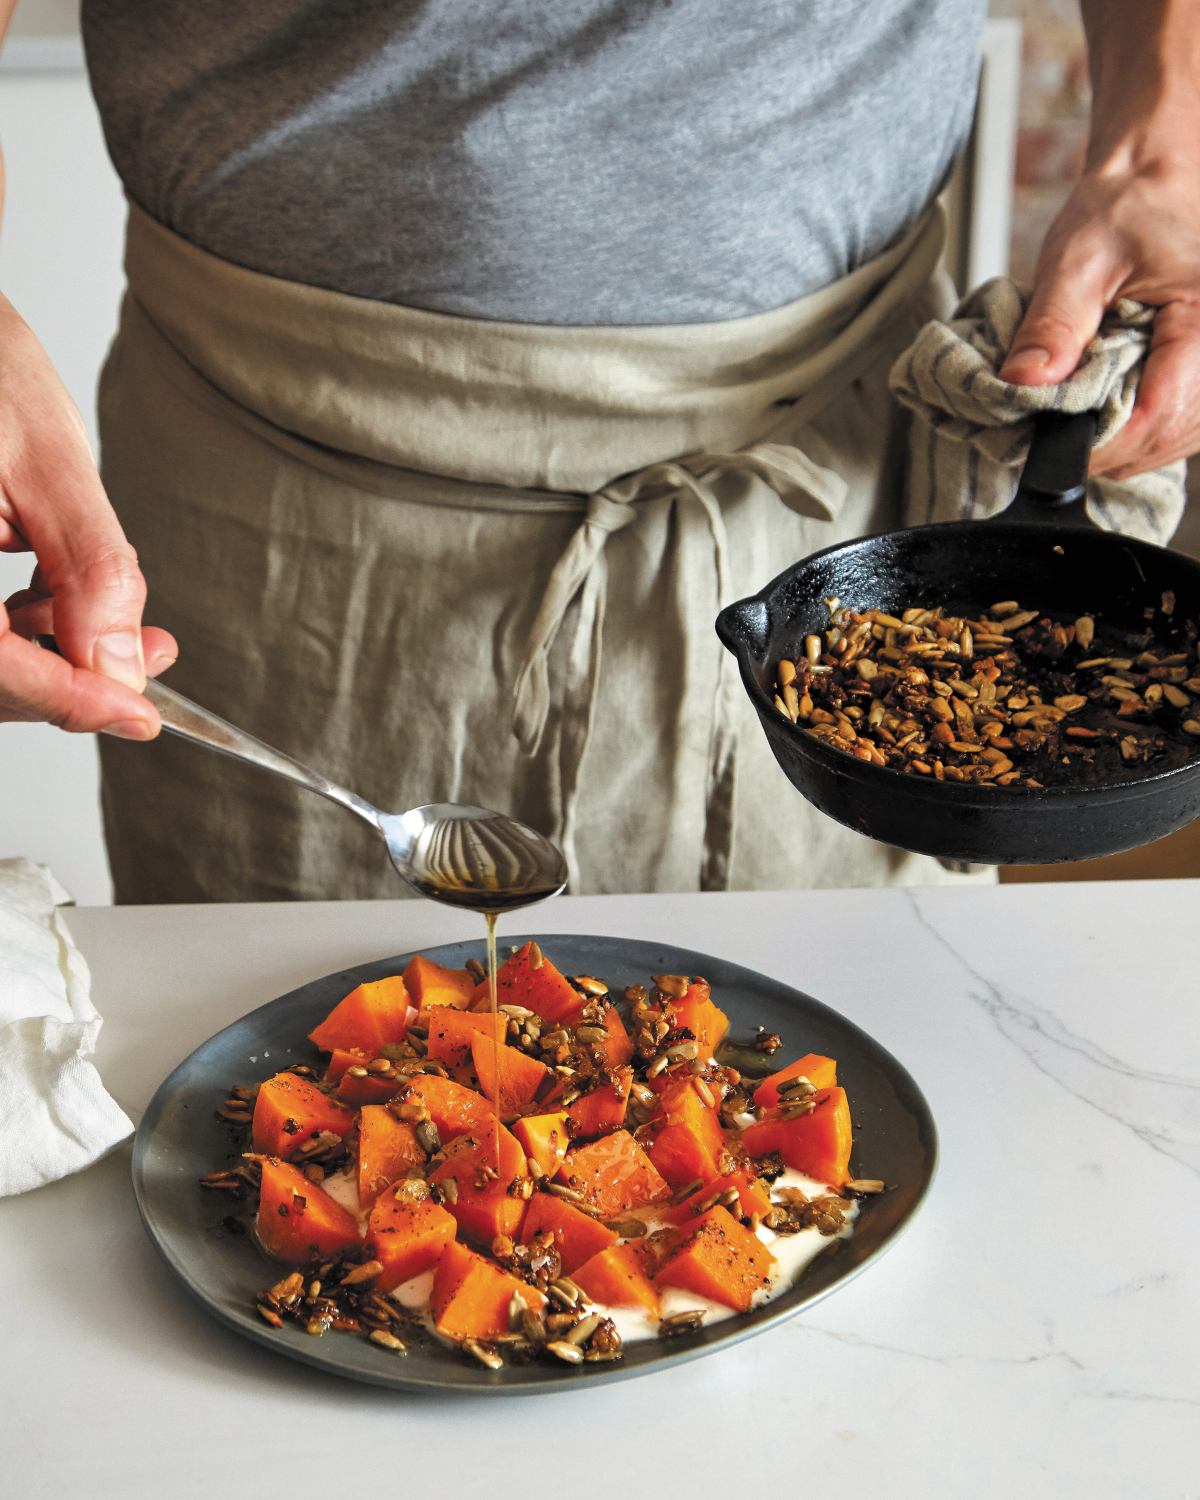 Spiced sunflower seeds and caramelized onions add punch to chilled chunks of precooked sweet potatoes in this dish from "Start Simple" by Lukas Volger.